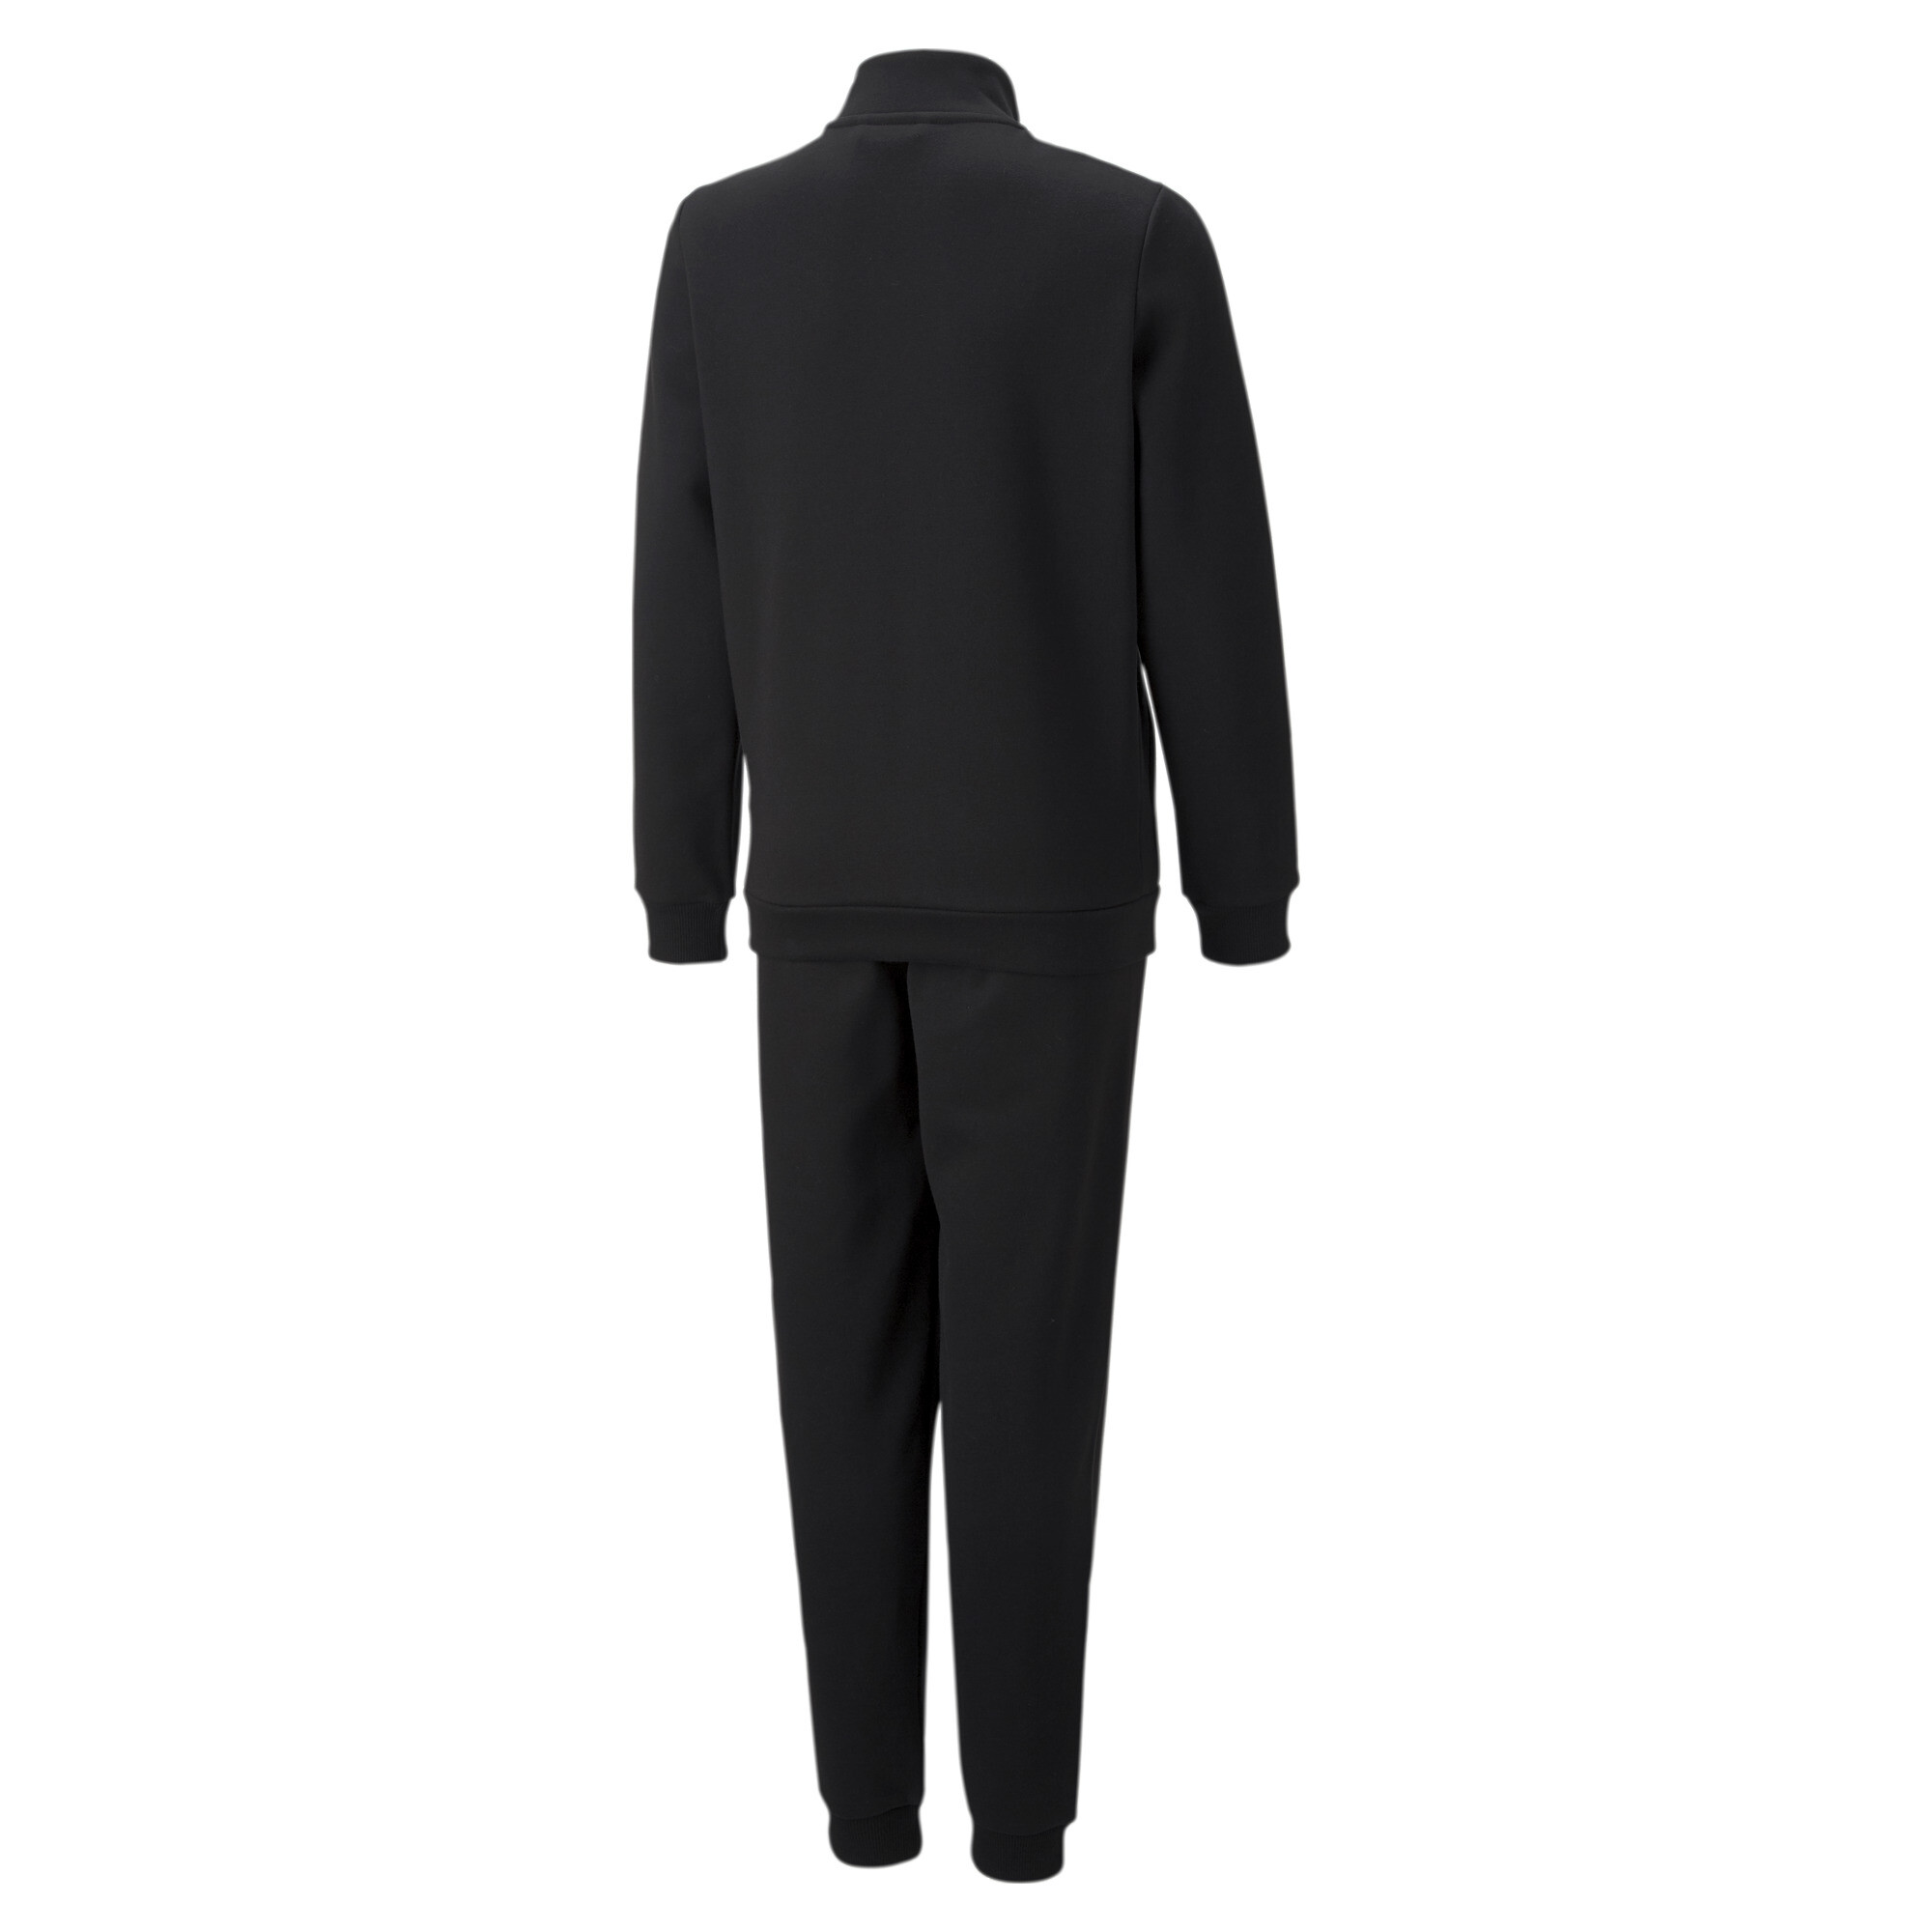 Men's Puma Tape Sweat Suit Youth, Black, Size 7-8Y, Clothing